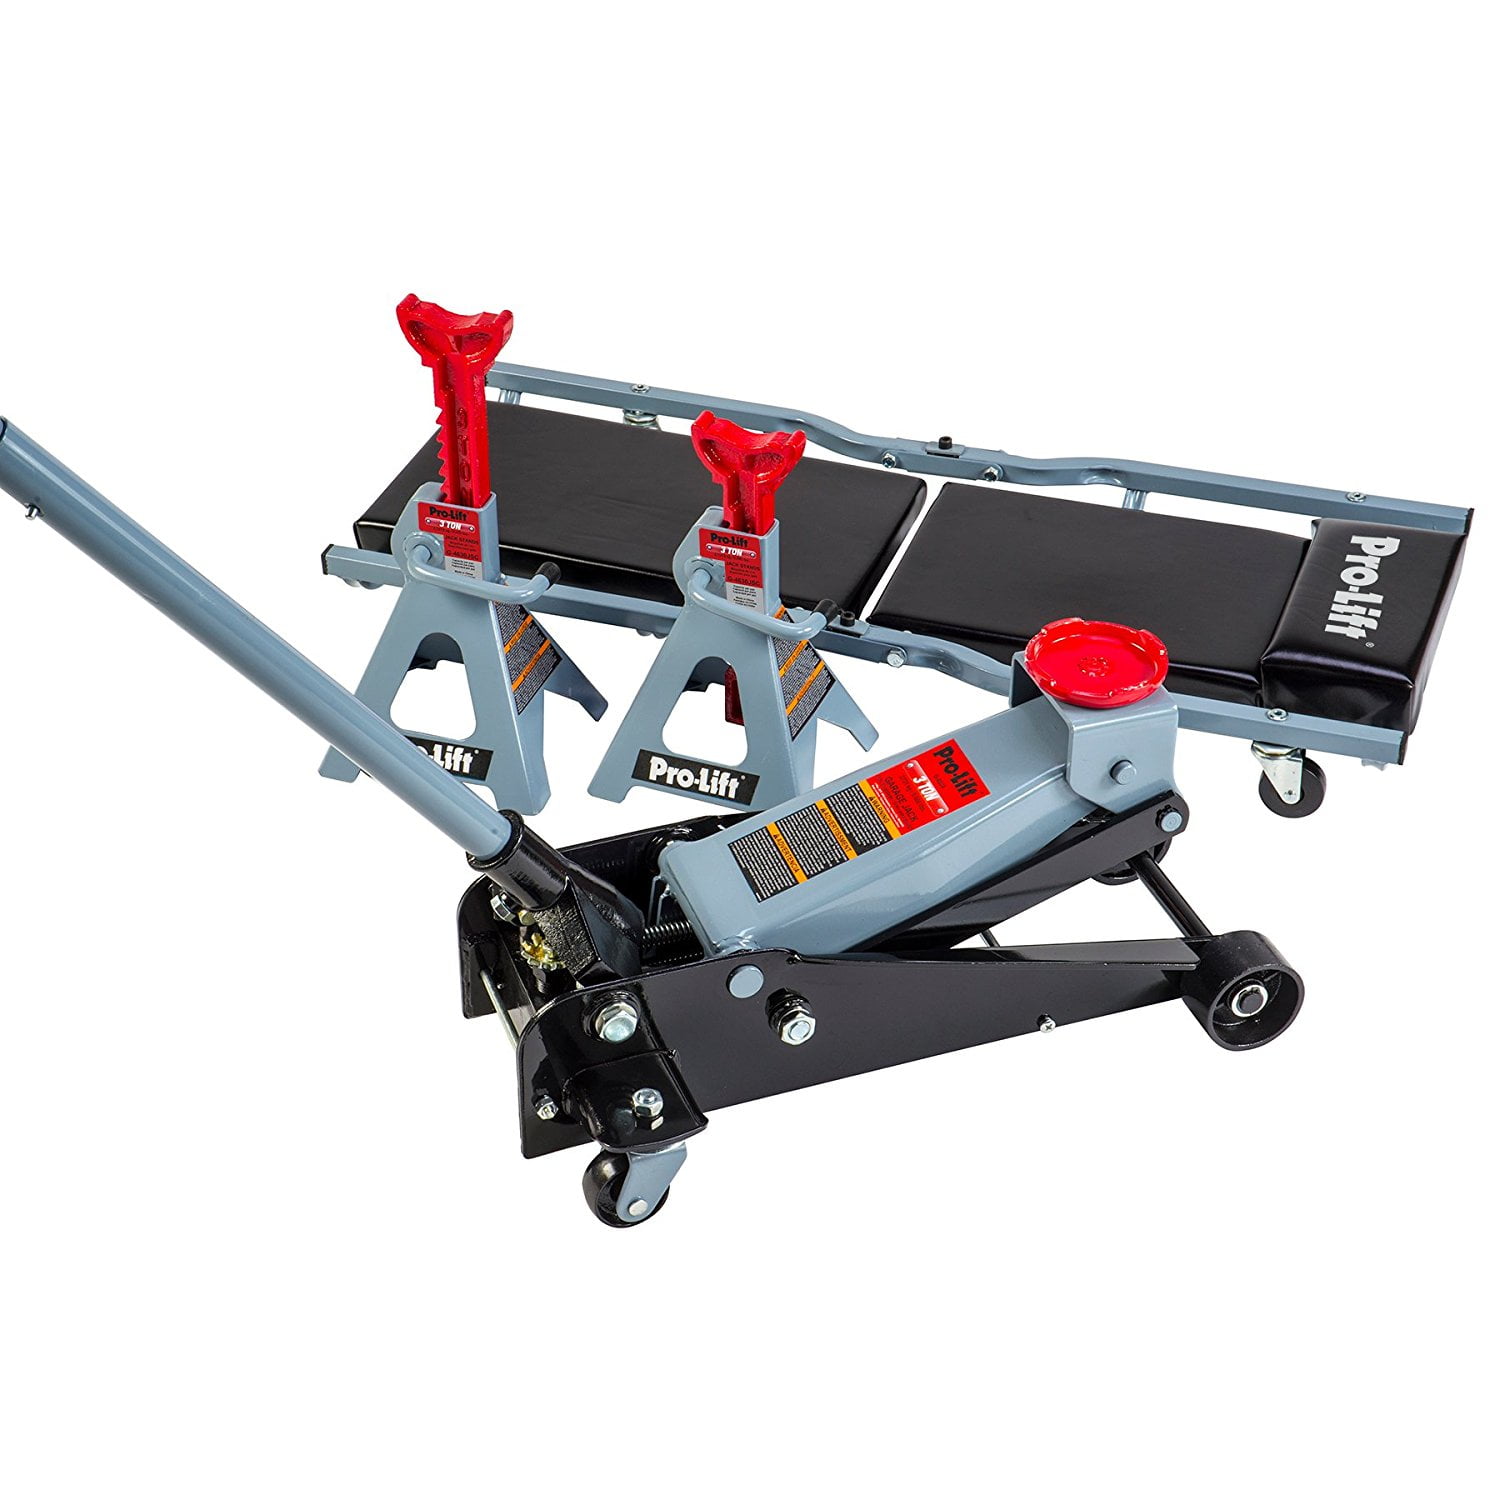 Details about   3 Ton Steel Heavy Duty Floor Jack with Rapid Pump Garage Shop Home Lifting Jack 